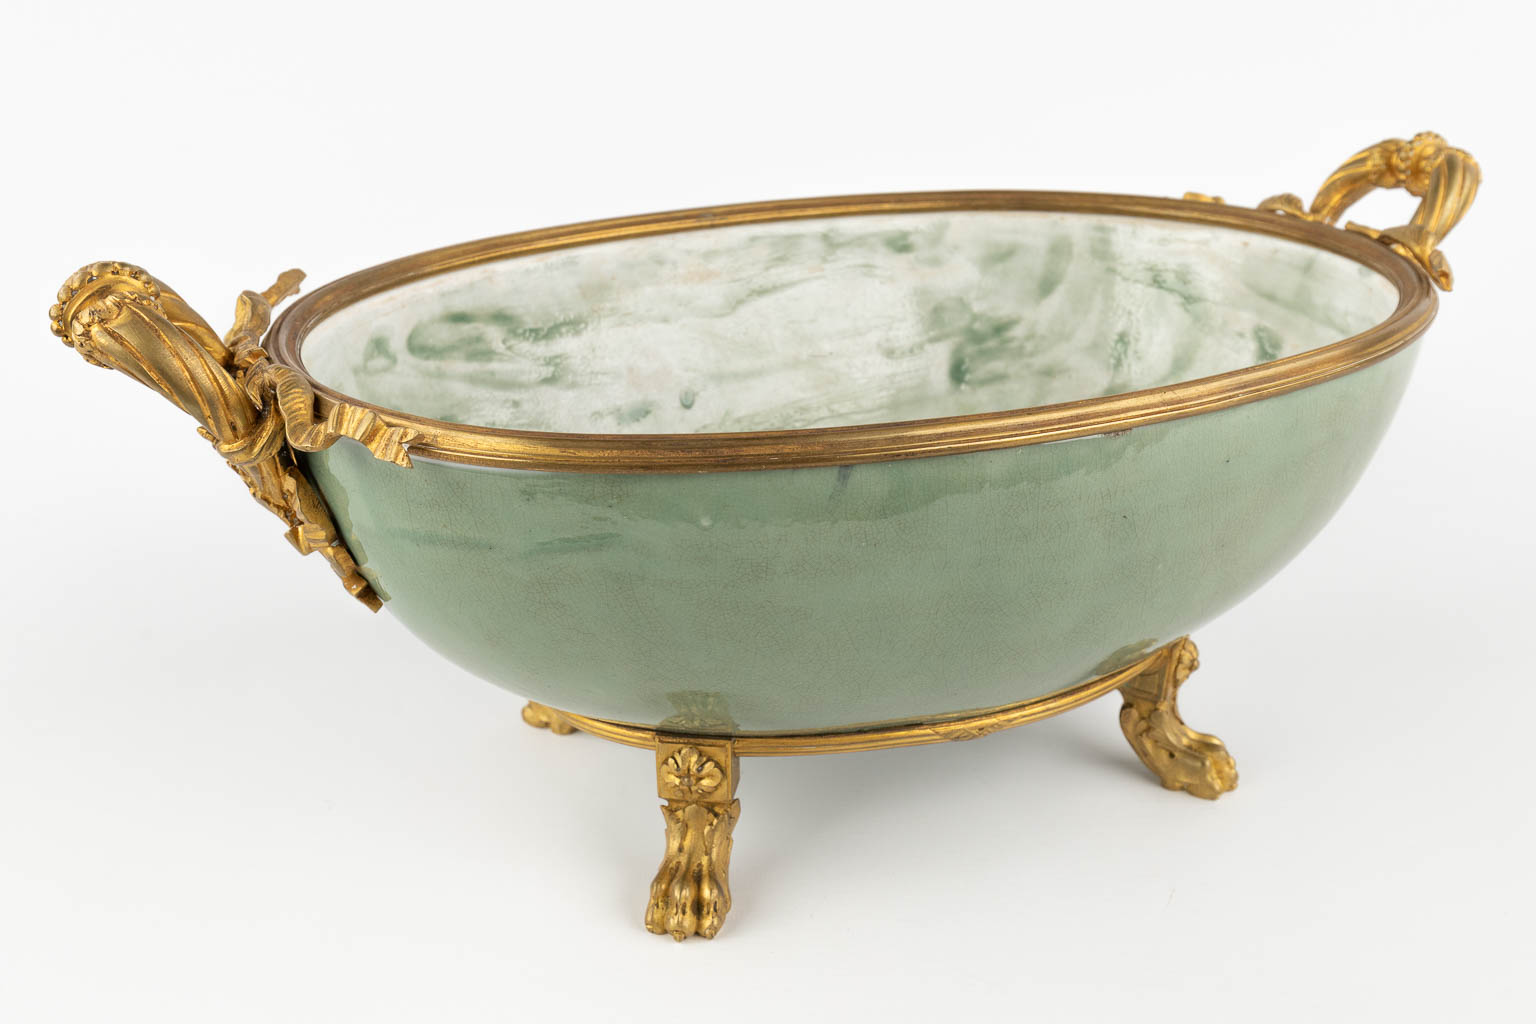 A large bowl mounted with gilt bronze. Glazed stoneware. (D:26 x W:47 x H:20 cm)